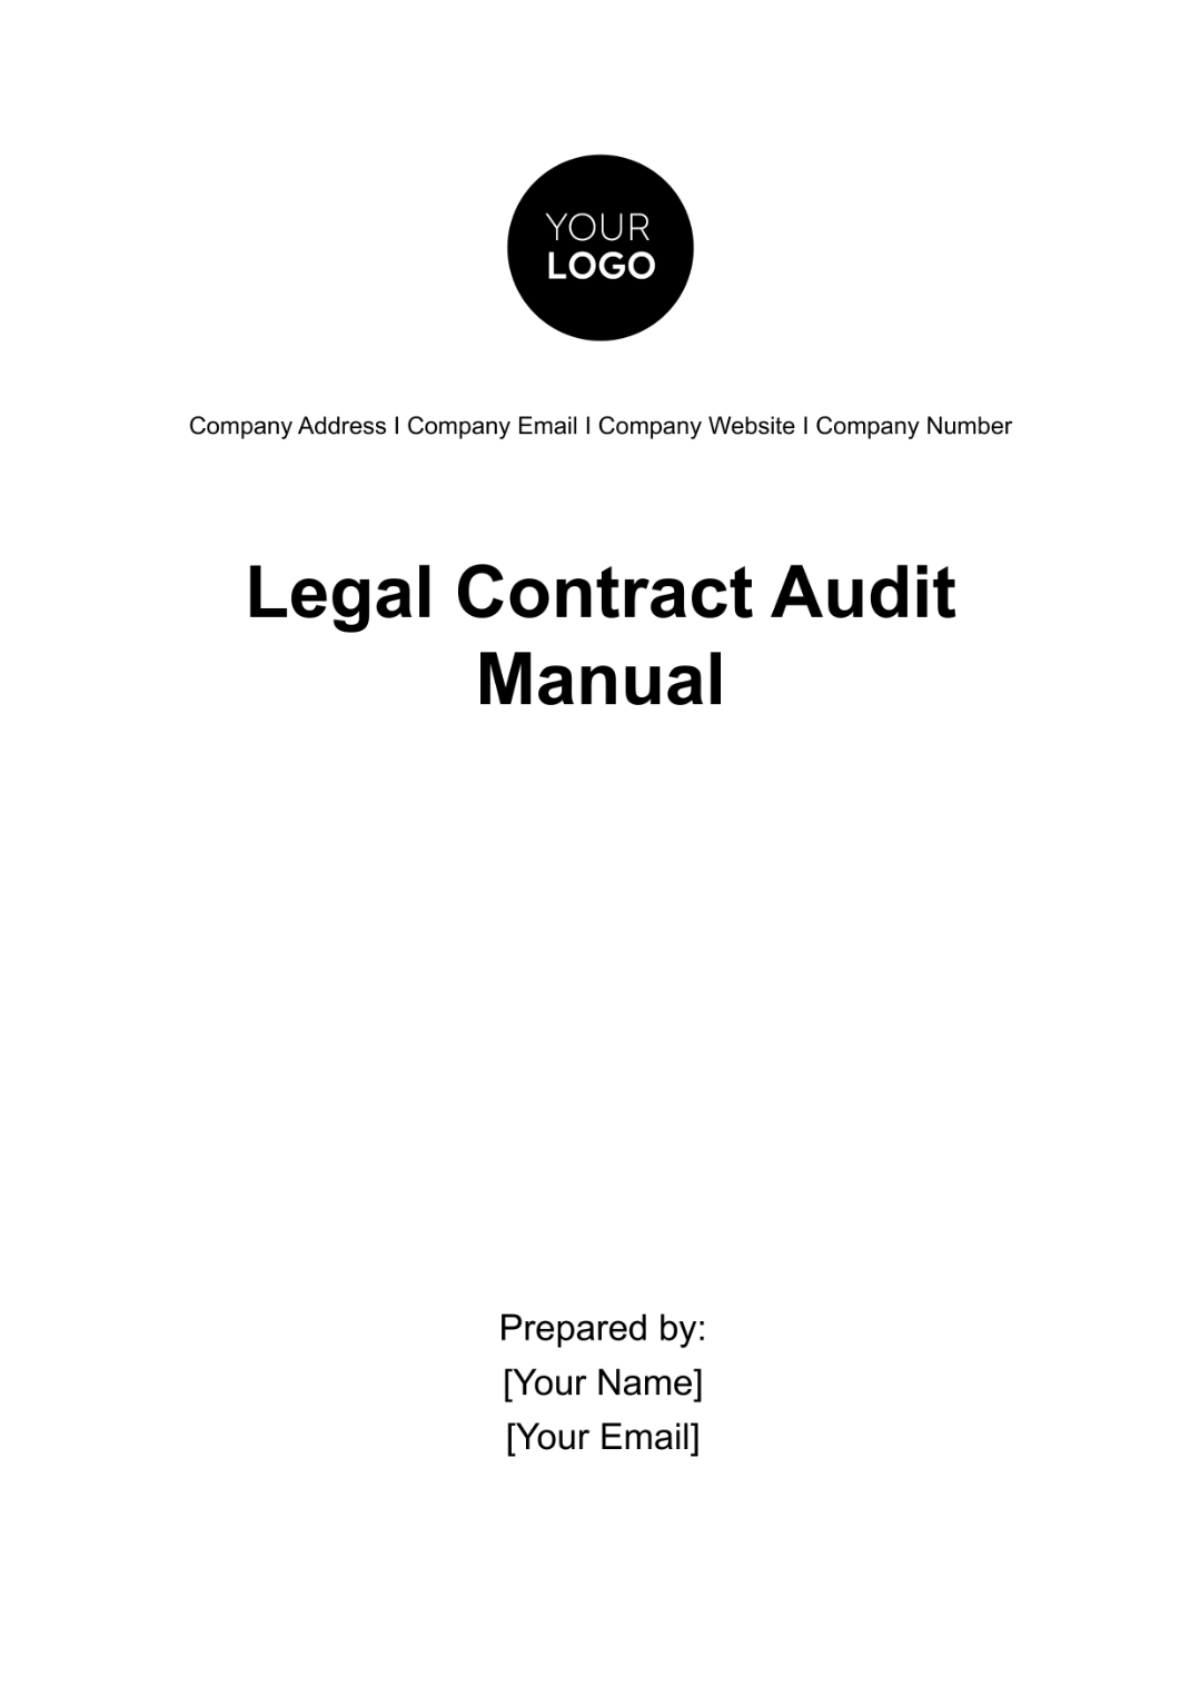 Legal Contract Audit Manual Template